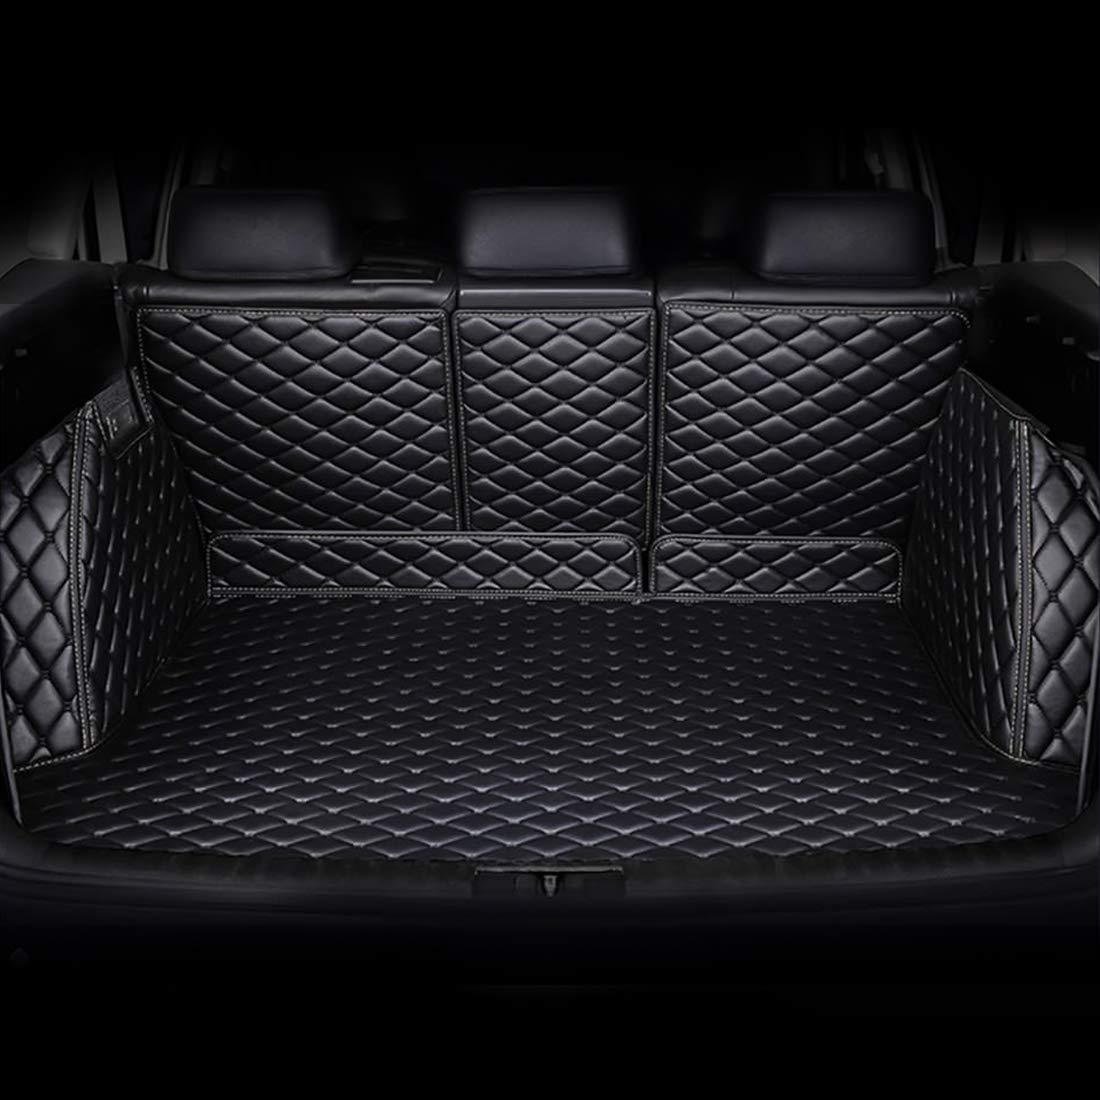 Buy 7D Luxury Custom Fitted Car Trunk Mat for KIA Sonet GT Line 2020 -  Black Online atâœ“Best Price in India